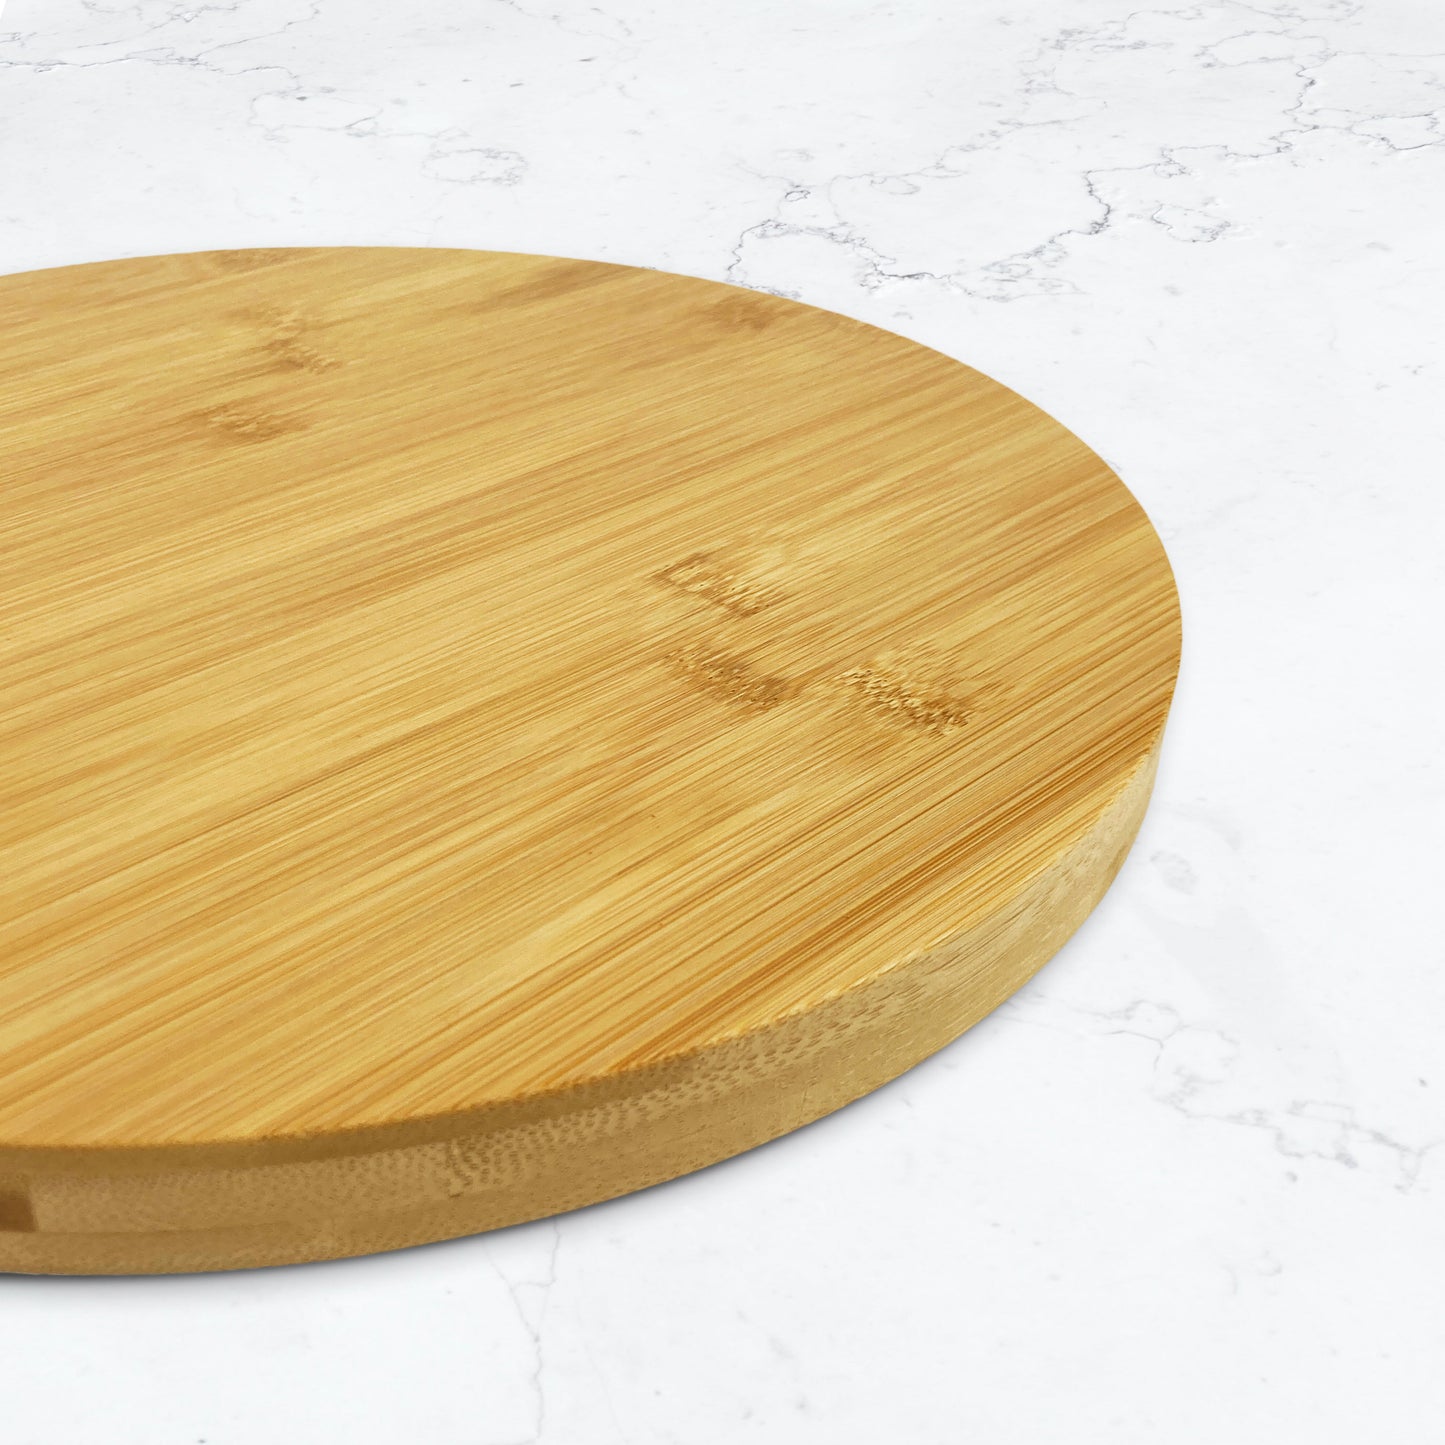 Round Wooden Cutting Board Serving Wedding Gift Custom Names & Date